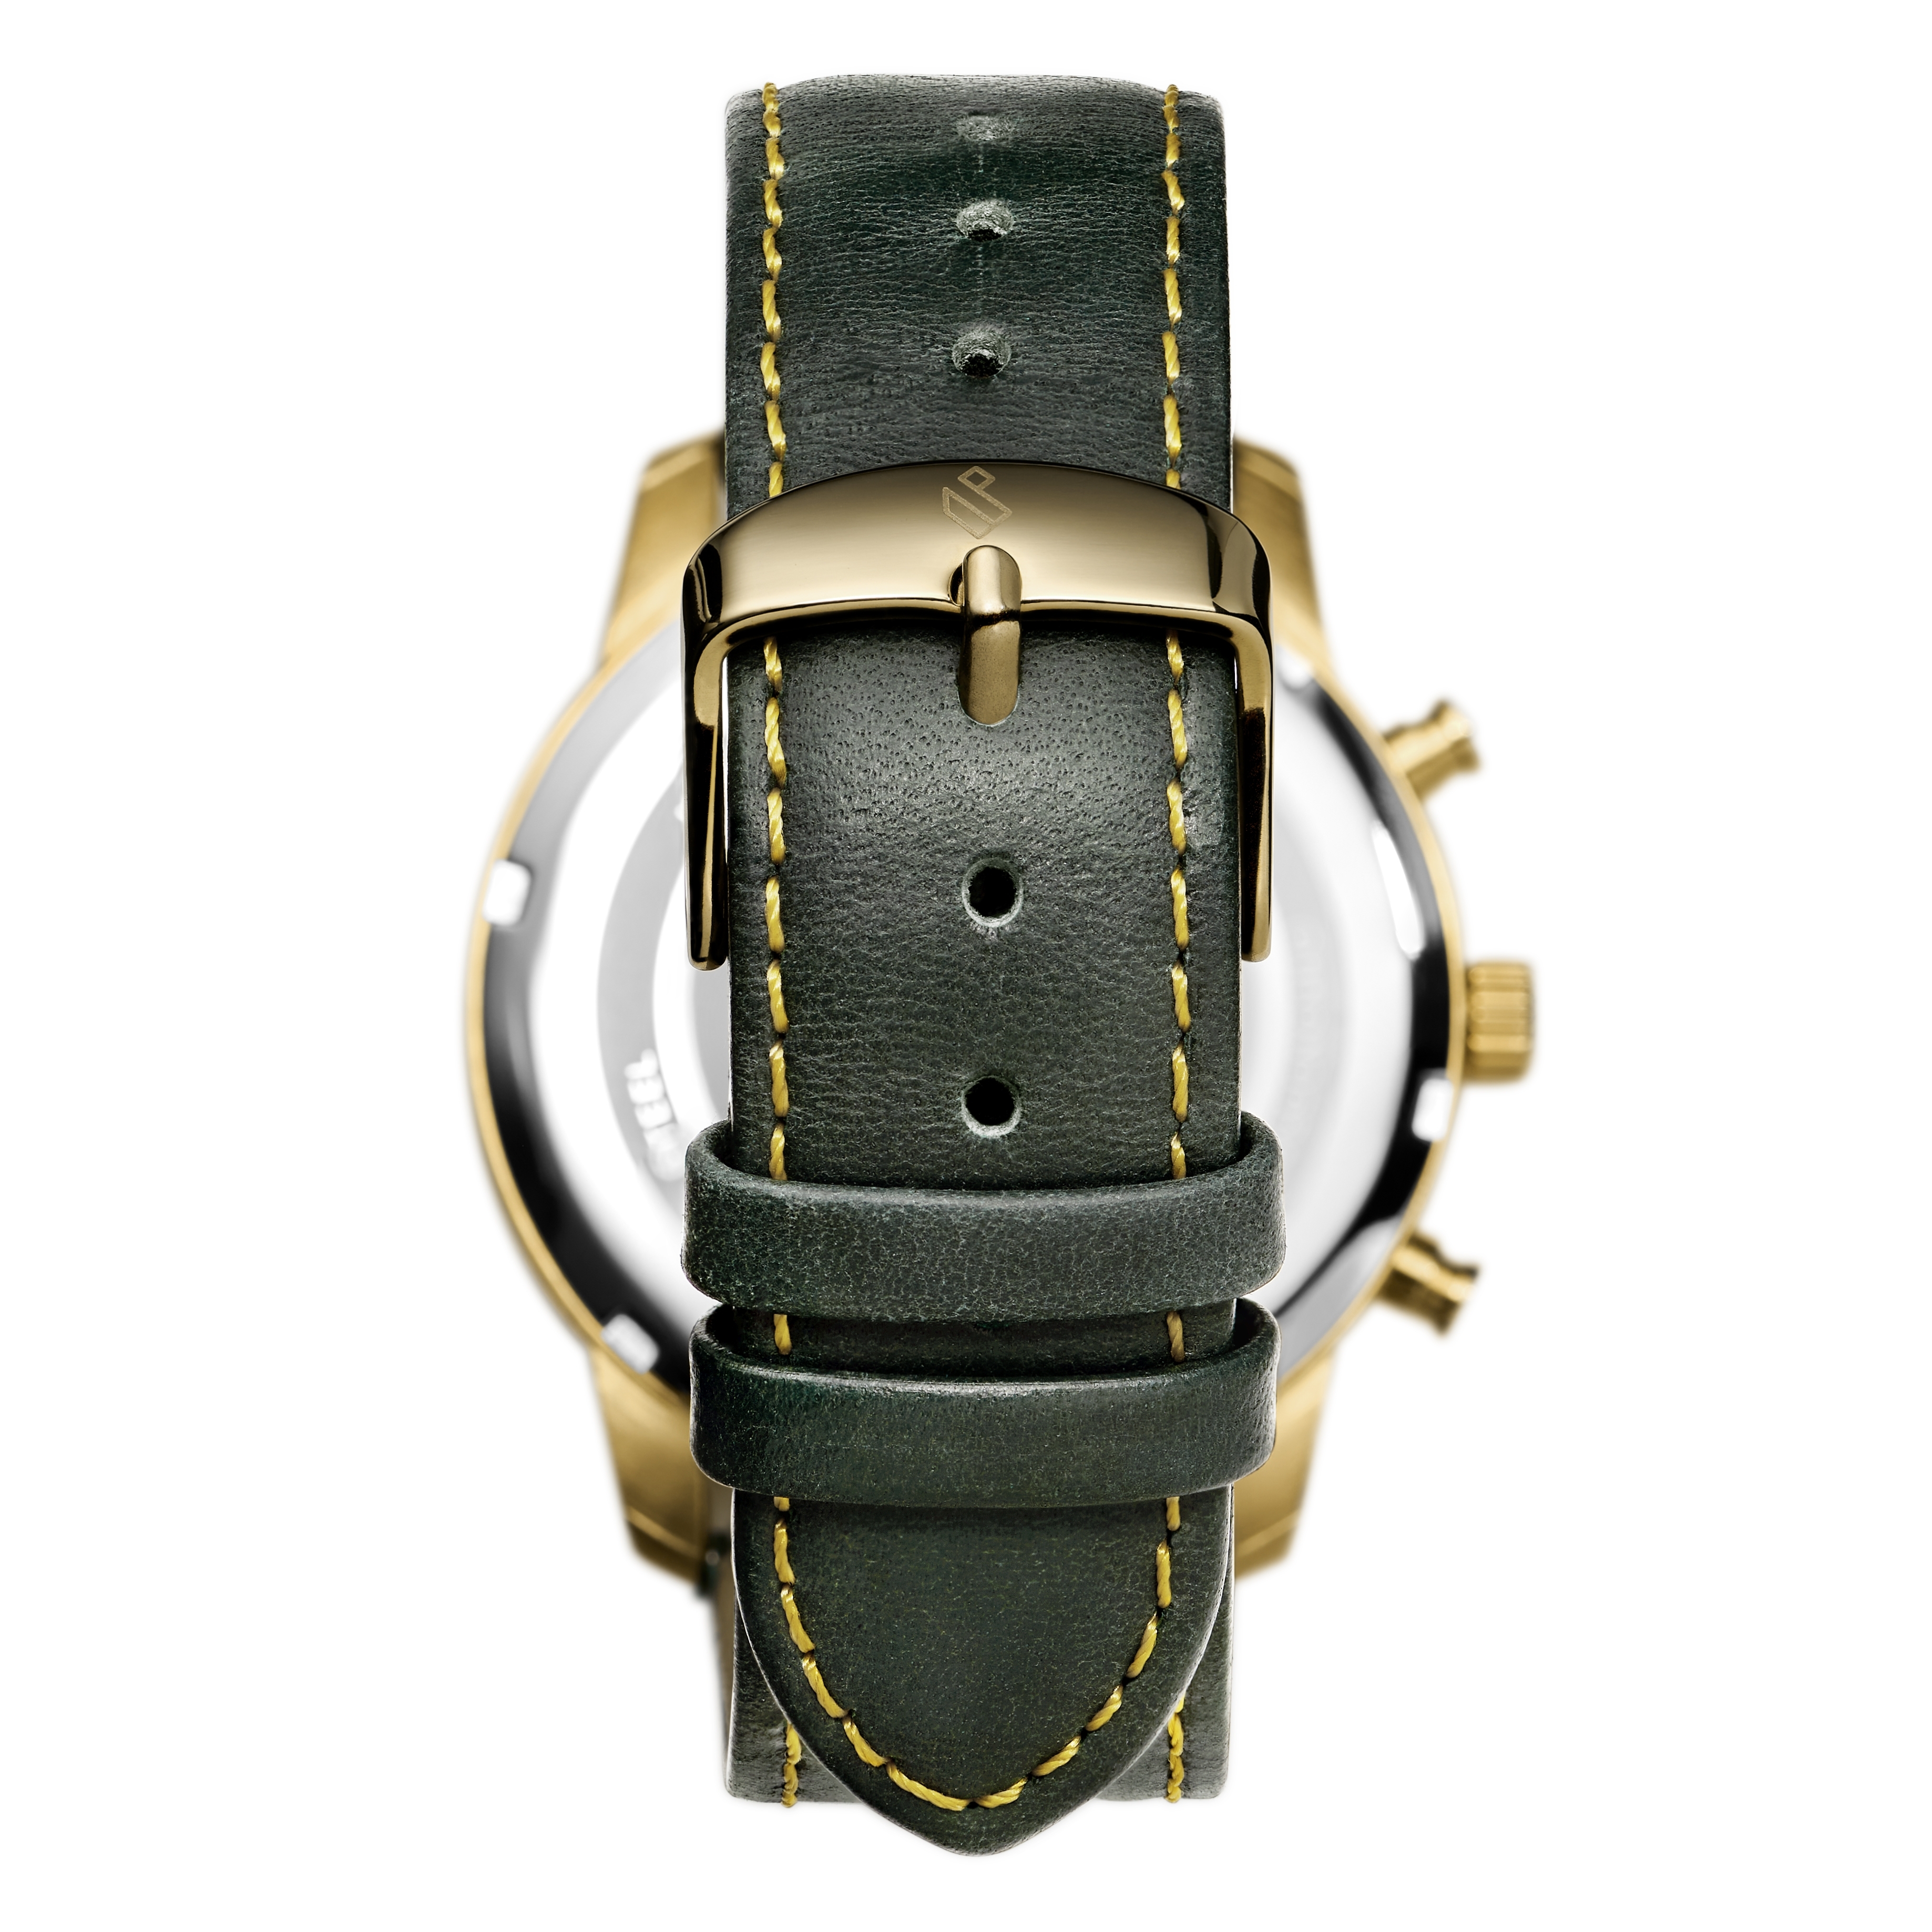 Chronograph & Black Watch Parva Leather | Seizmont Green stock! | Dial Gold-Tone Strap In With |